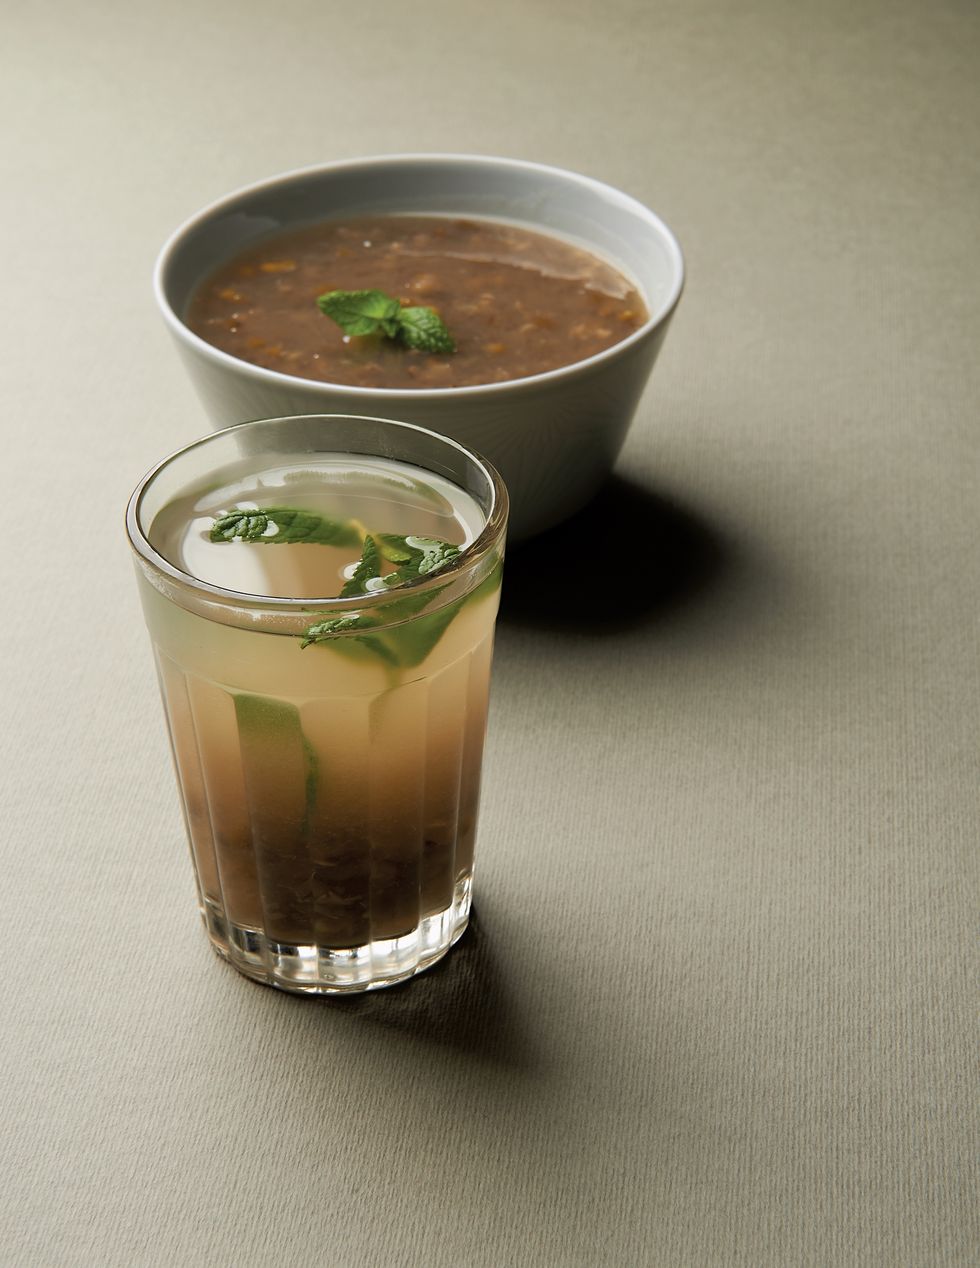 mint and mung bean sweet soup